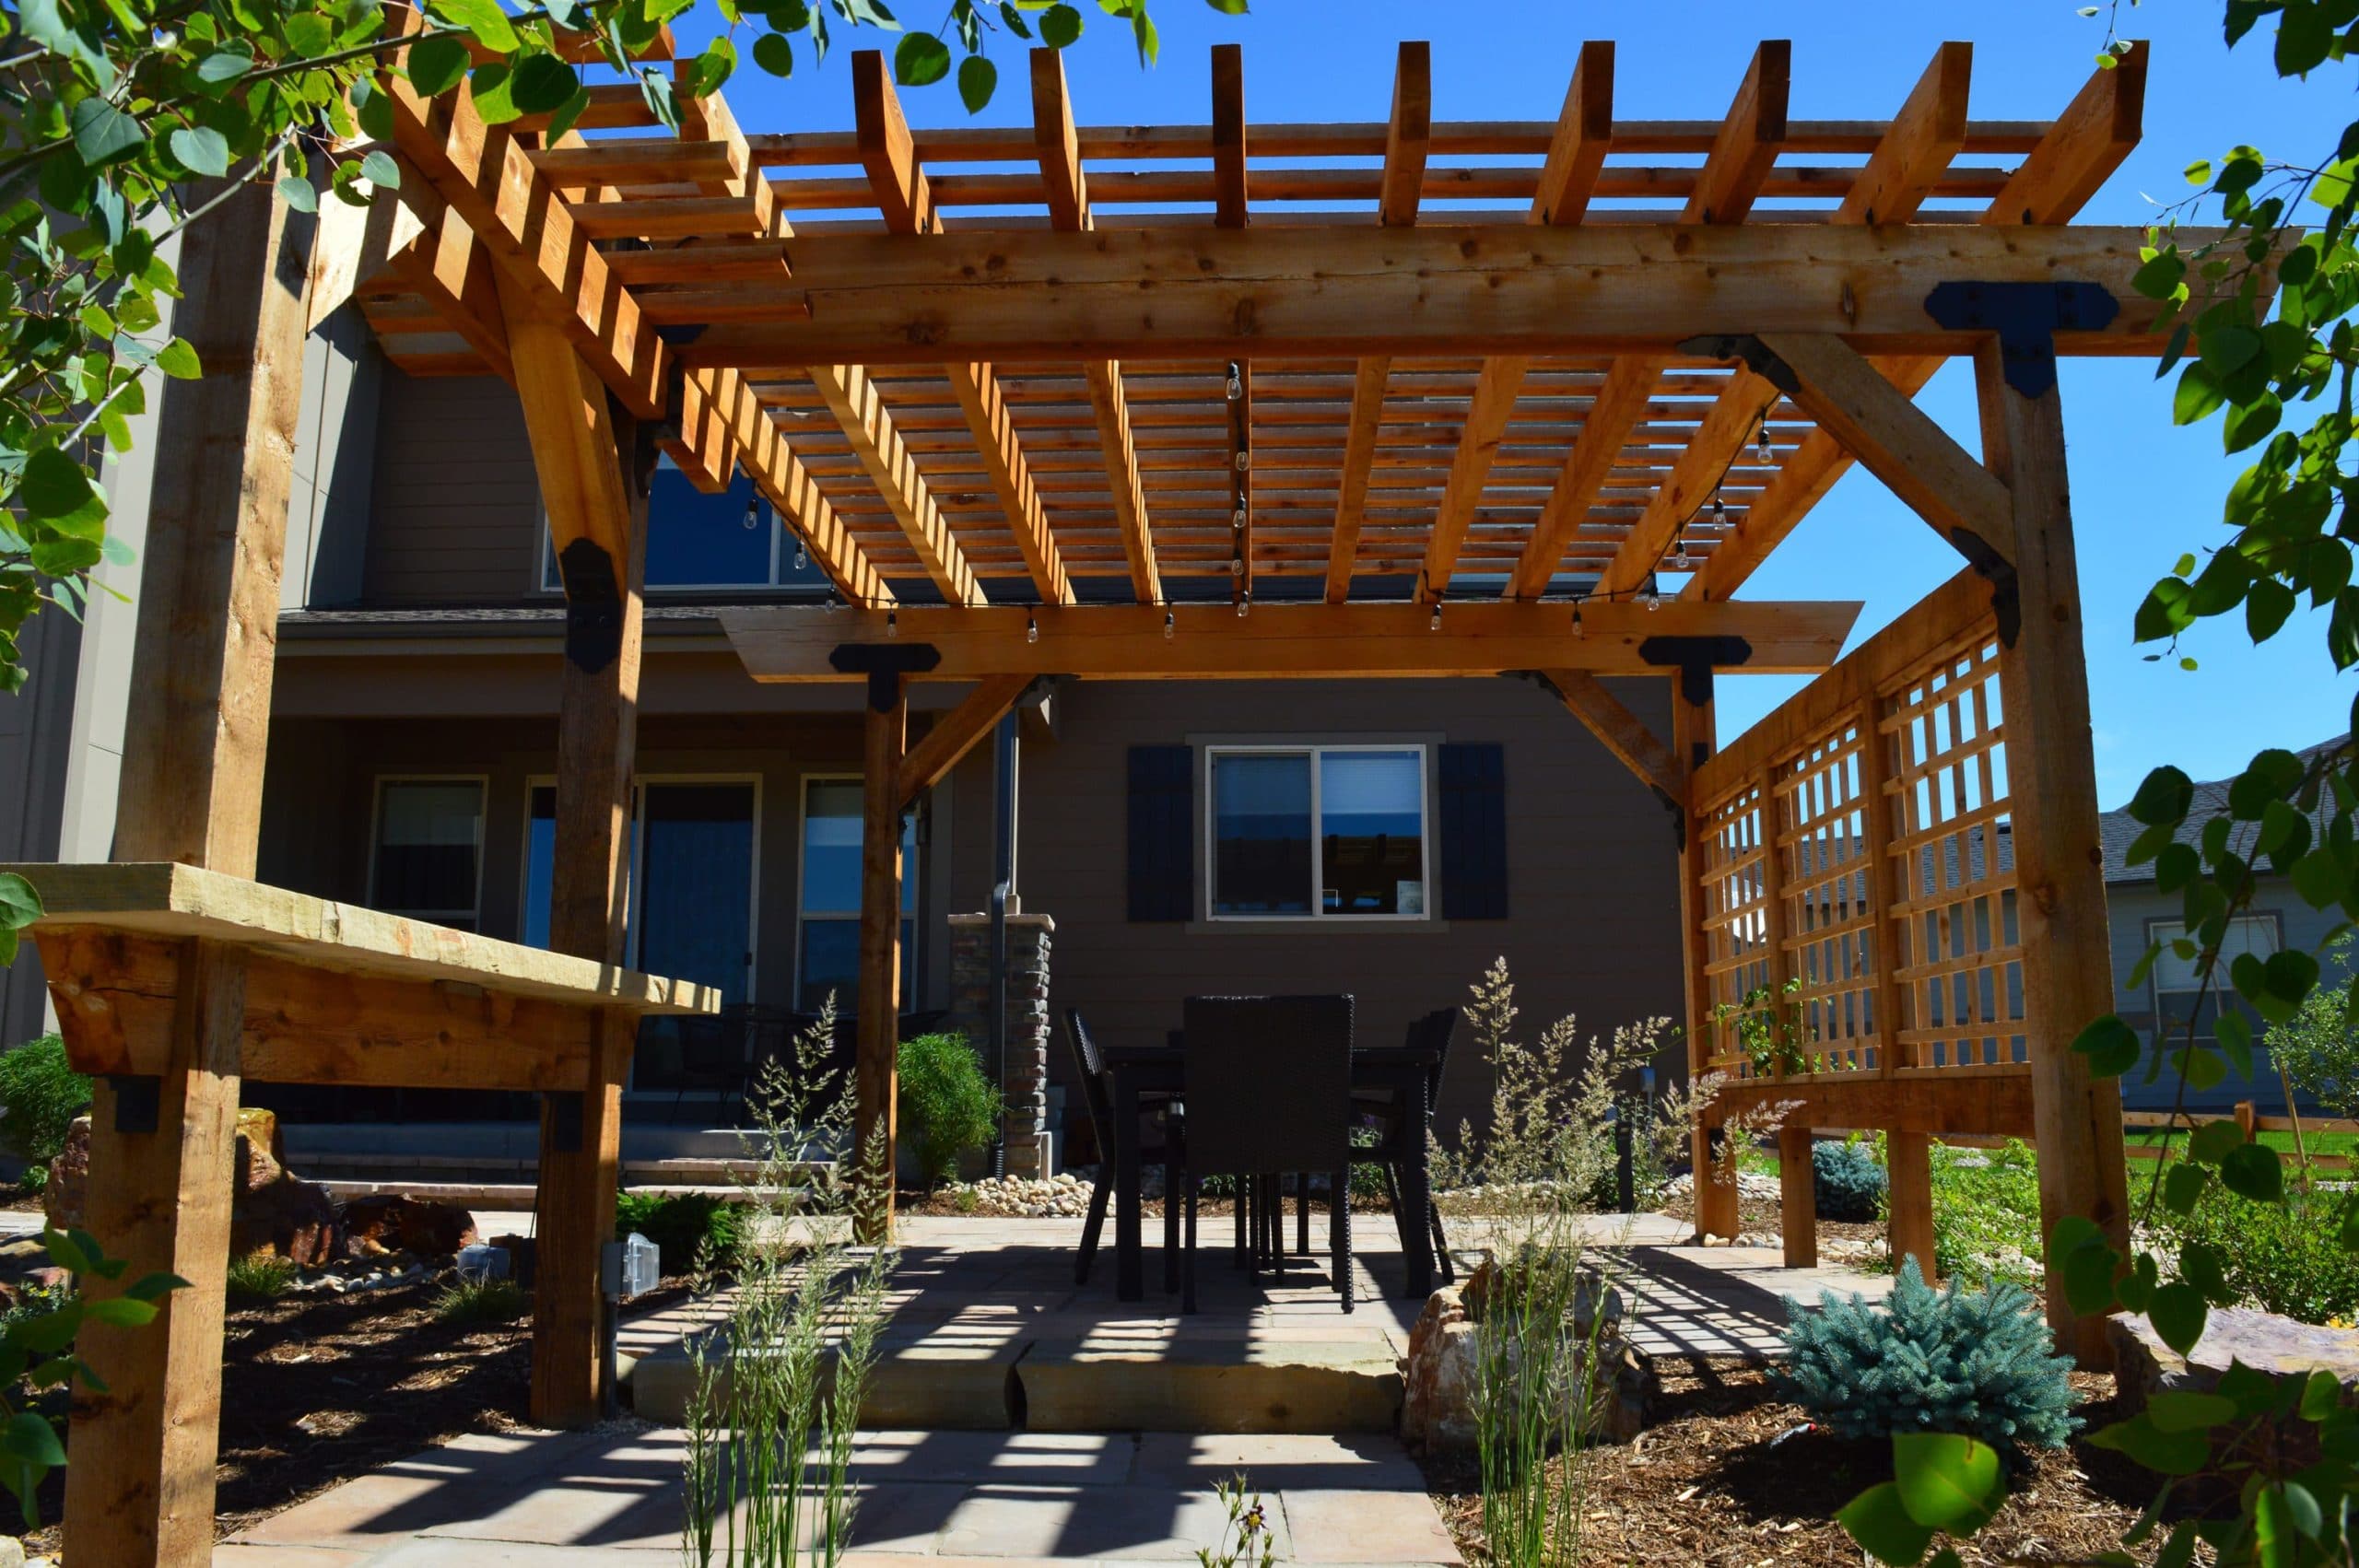 Pergola with dining area on top of brick laid patio surrounded by mulch and rocks with bushes and plants.